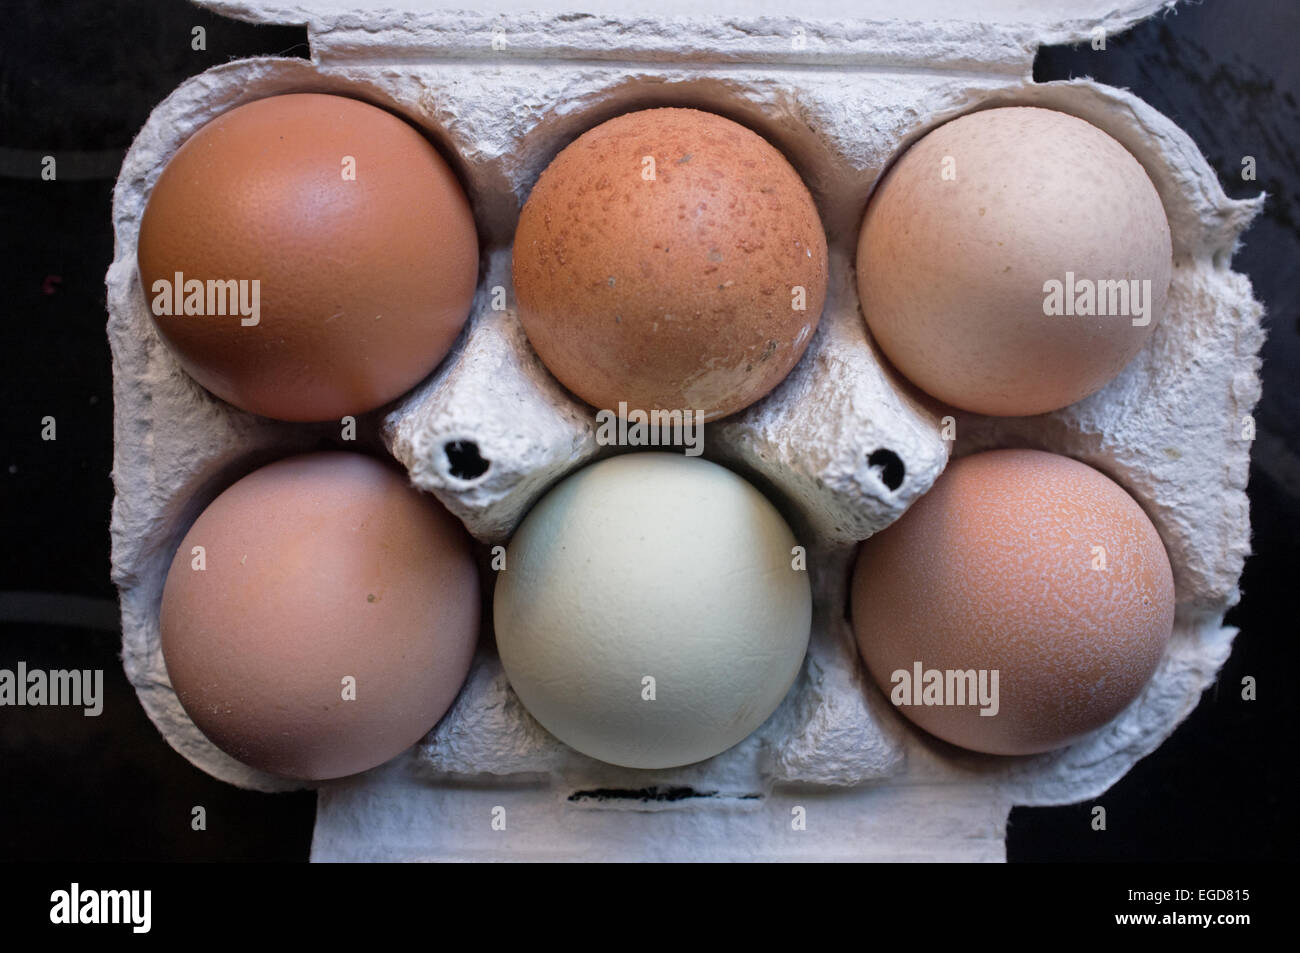 A box of free range local eggs showing a variety of colours. Stock Photo